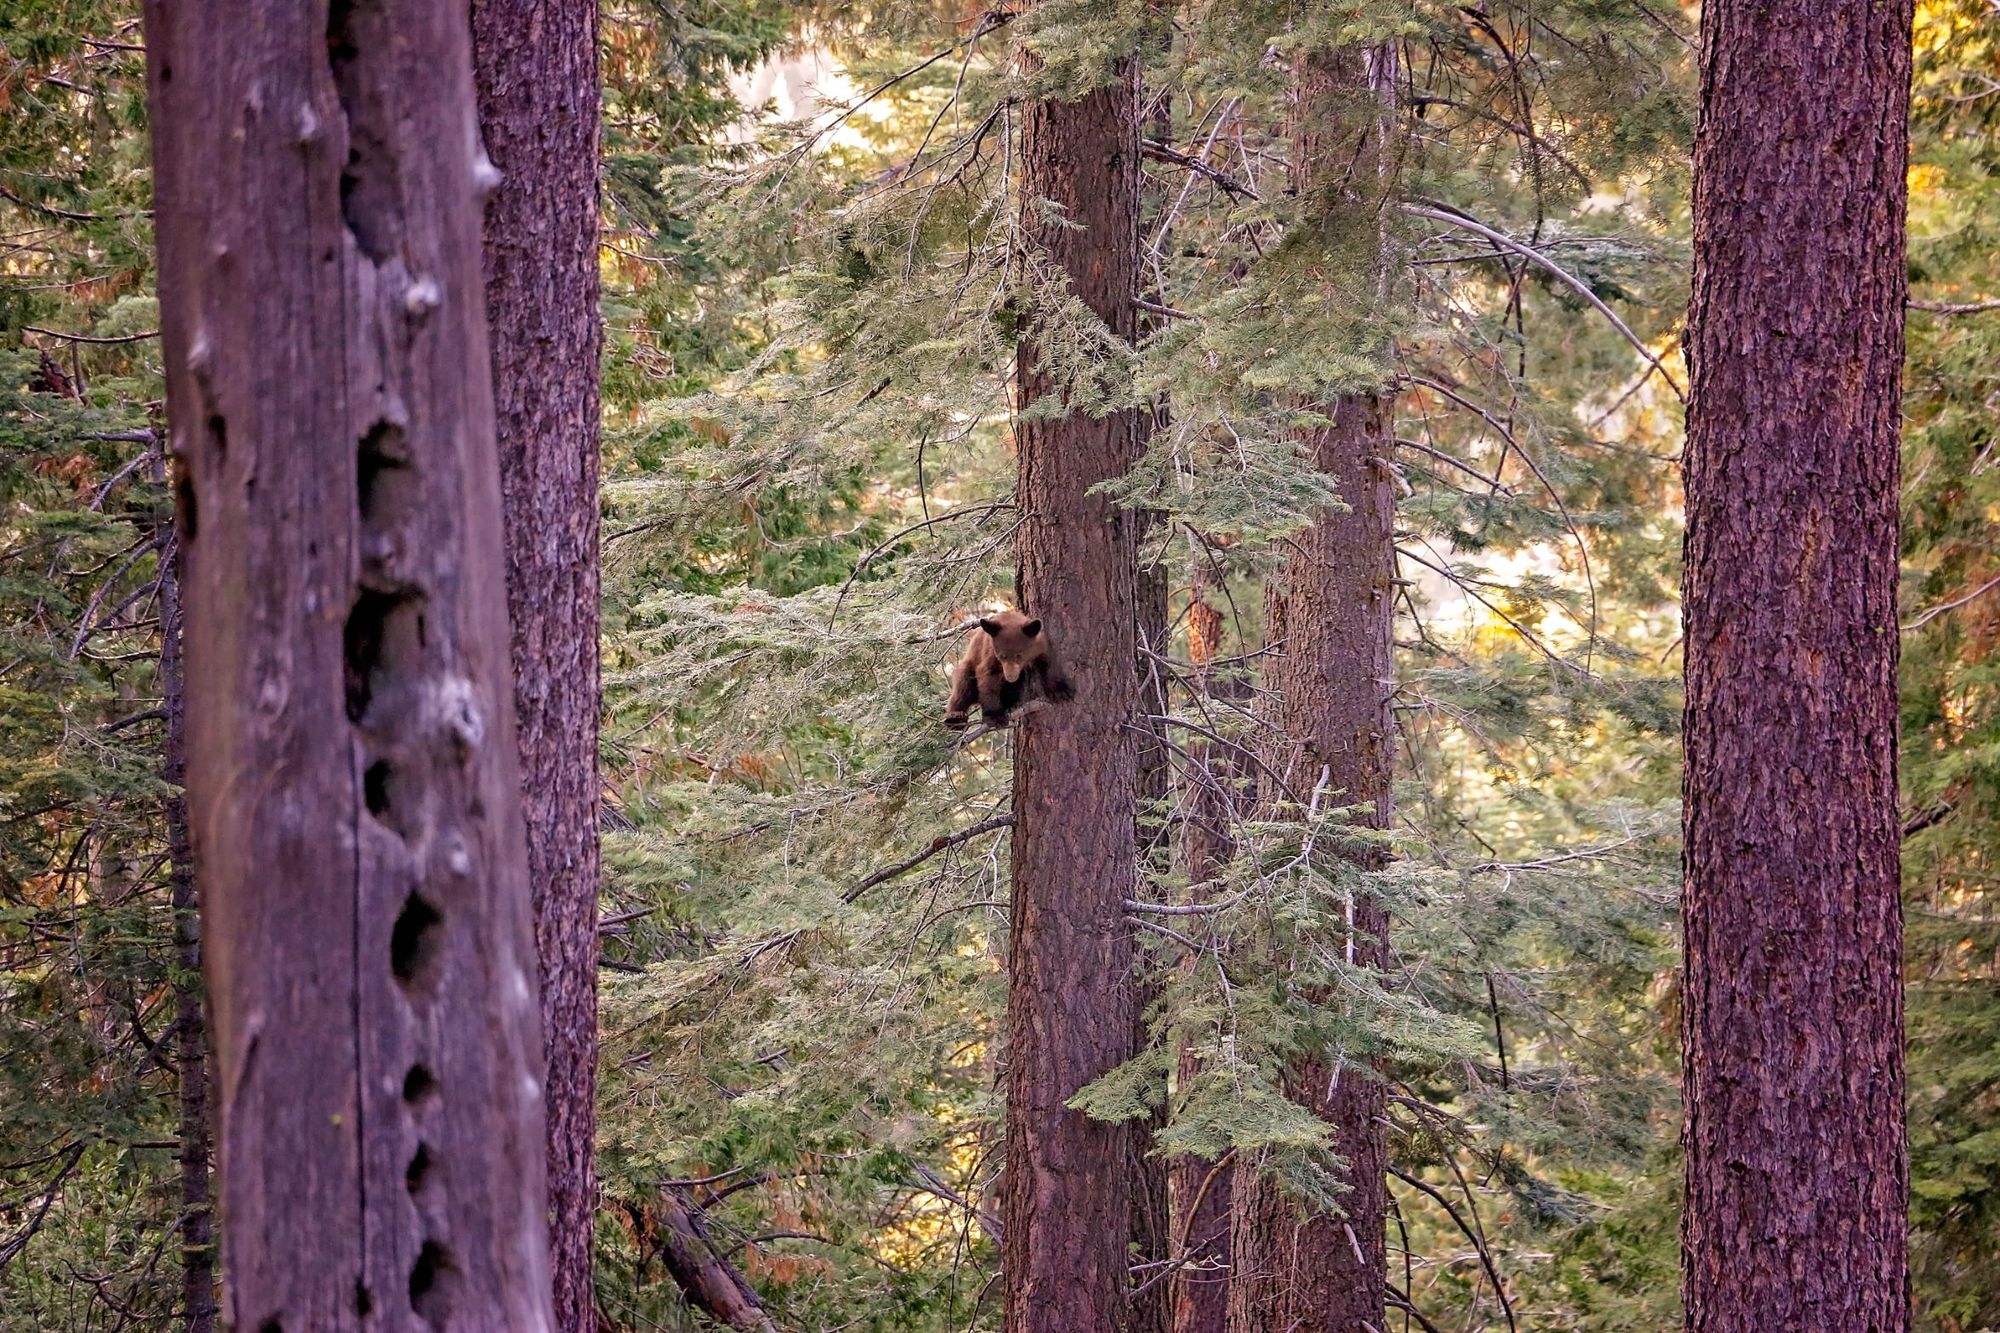 An adorable brown bear cub spotted up a tree in Yosemite. Photo: Getty